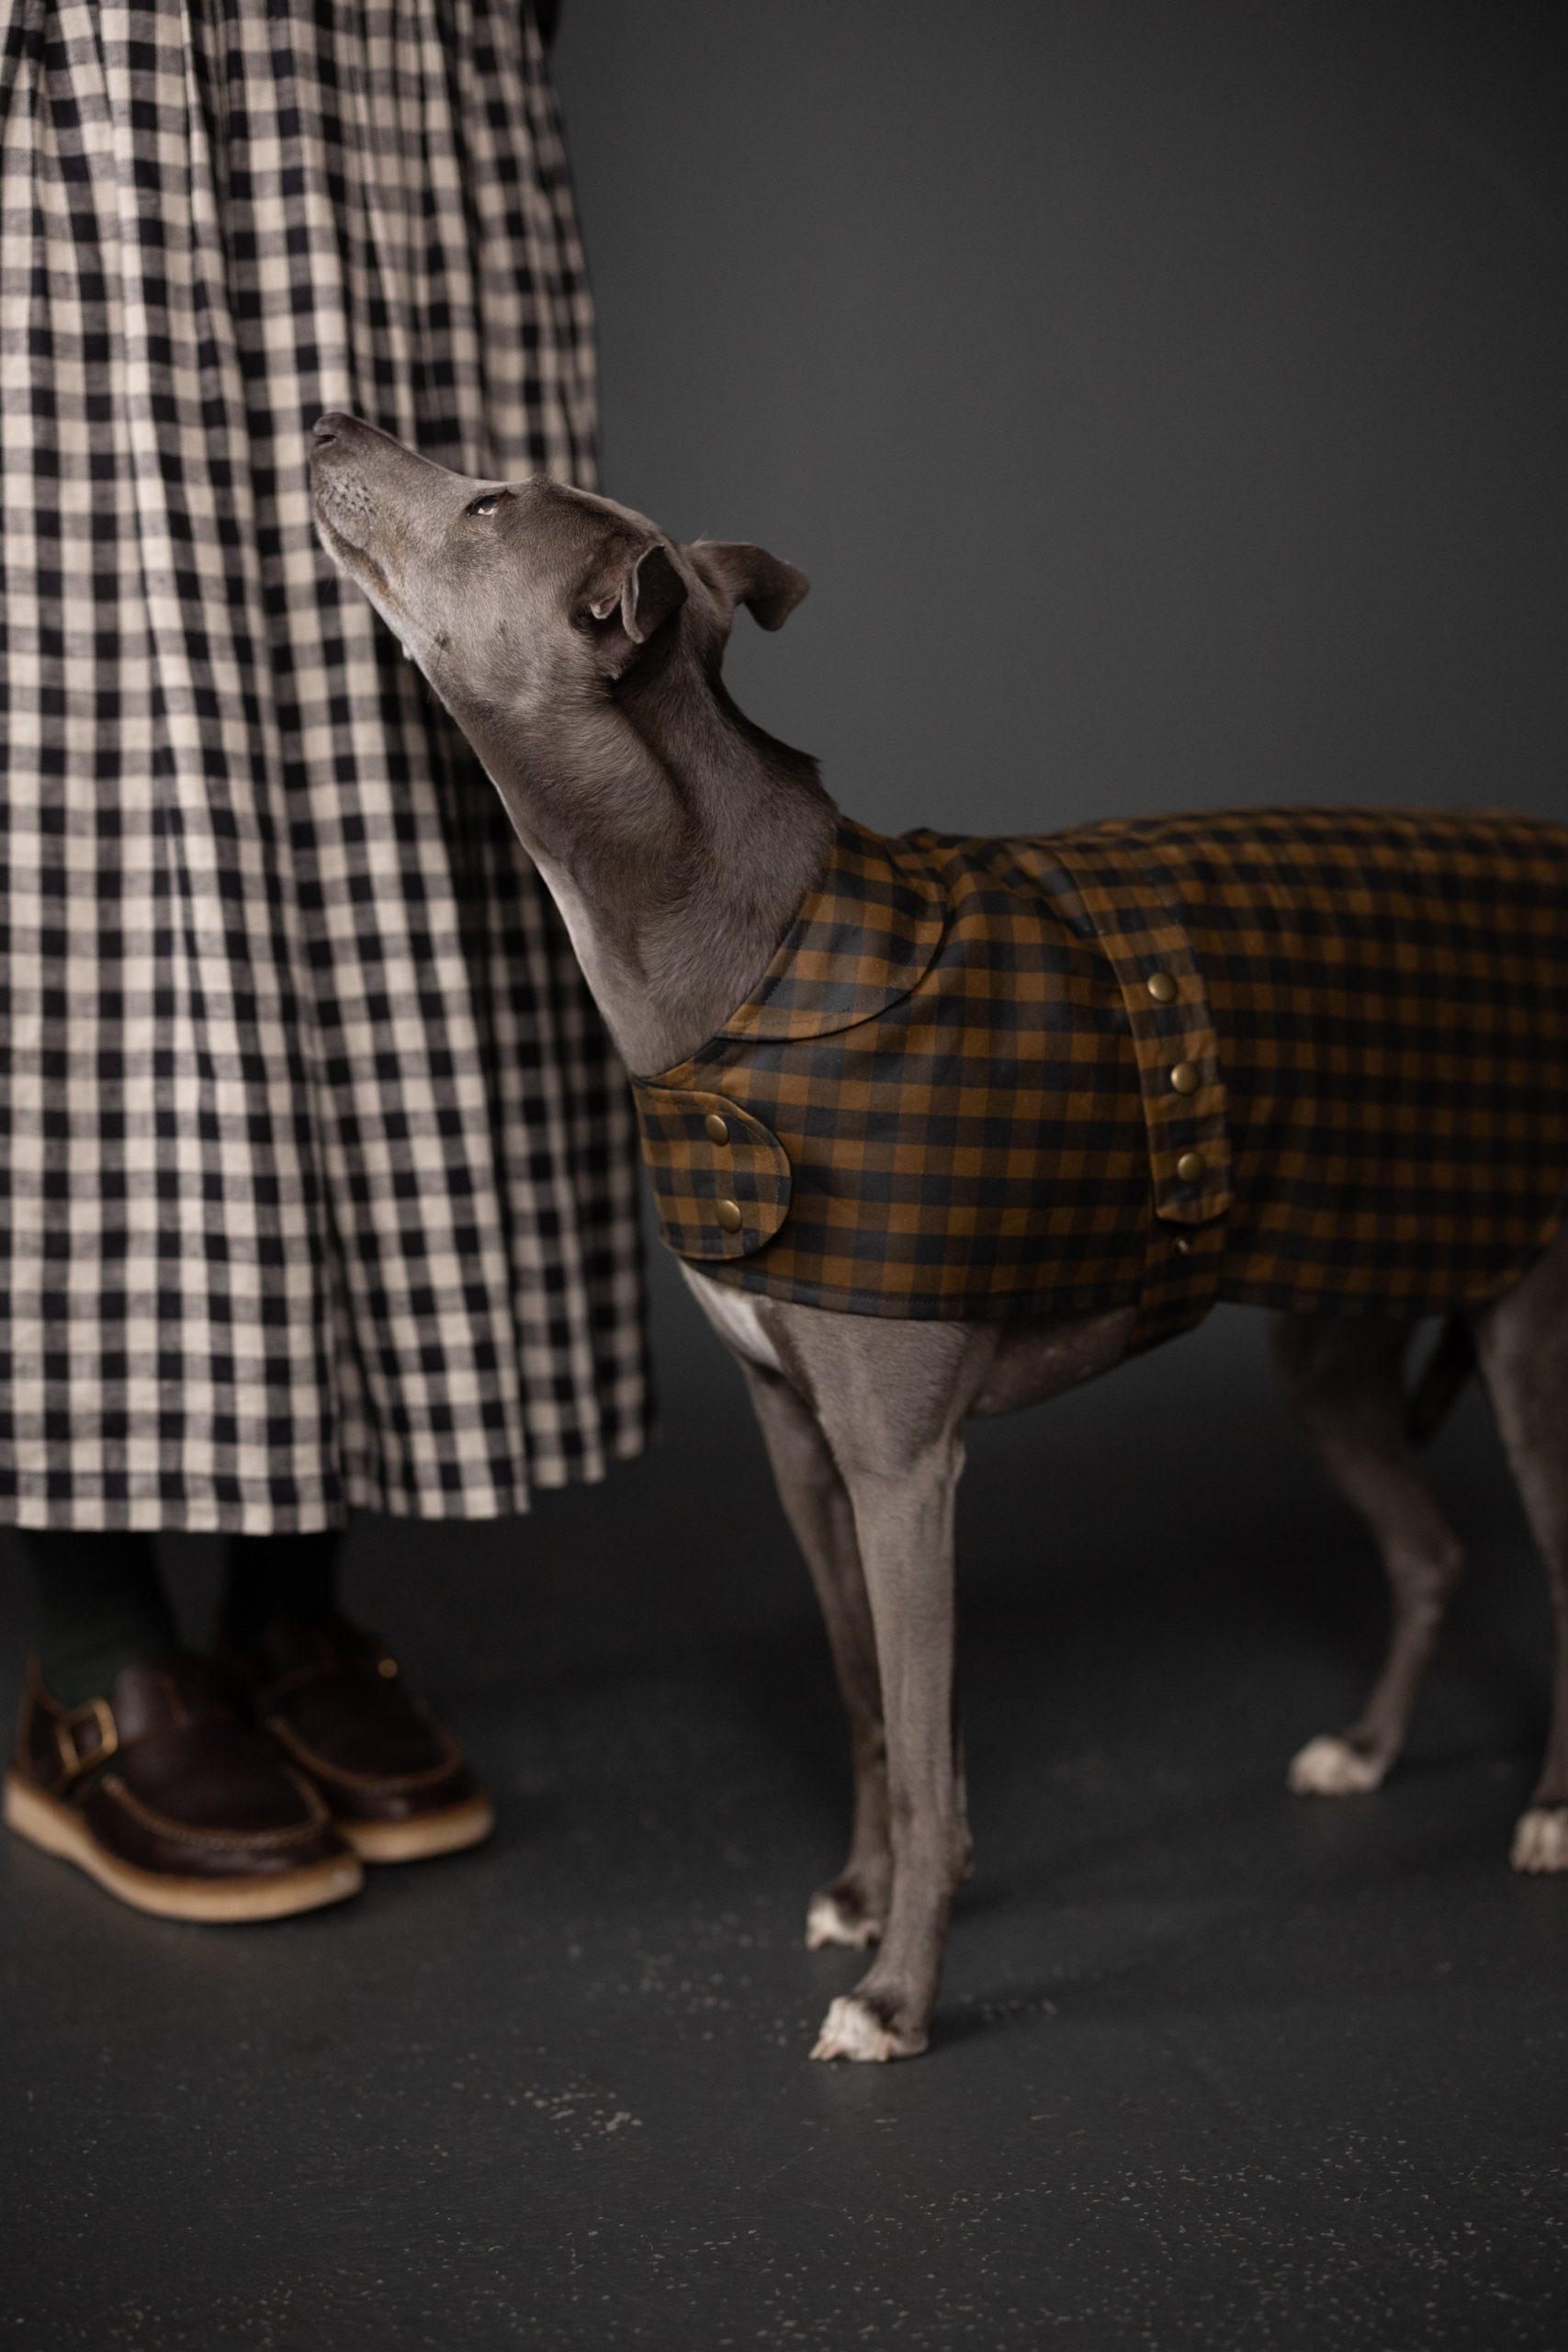 Dog wearing The Barka Dog Coat sewing pattern from Merchant & Mills on The Fold Line. A dog coat pattern made in oilskin, dry oilskin, mid-heavy cotton canvas, twill/drill, mid weight denim or corduroy fabrics, featuring a chest closure with metal snaps, full back coverage, under belly strap and metal snap closure and fully lined or padded.